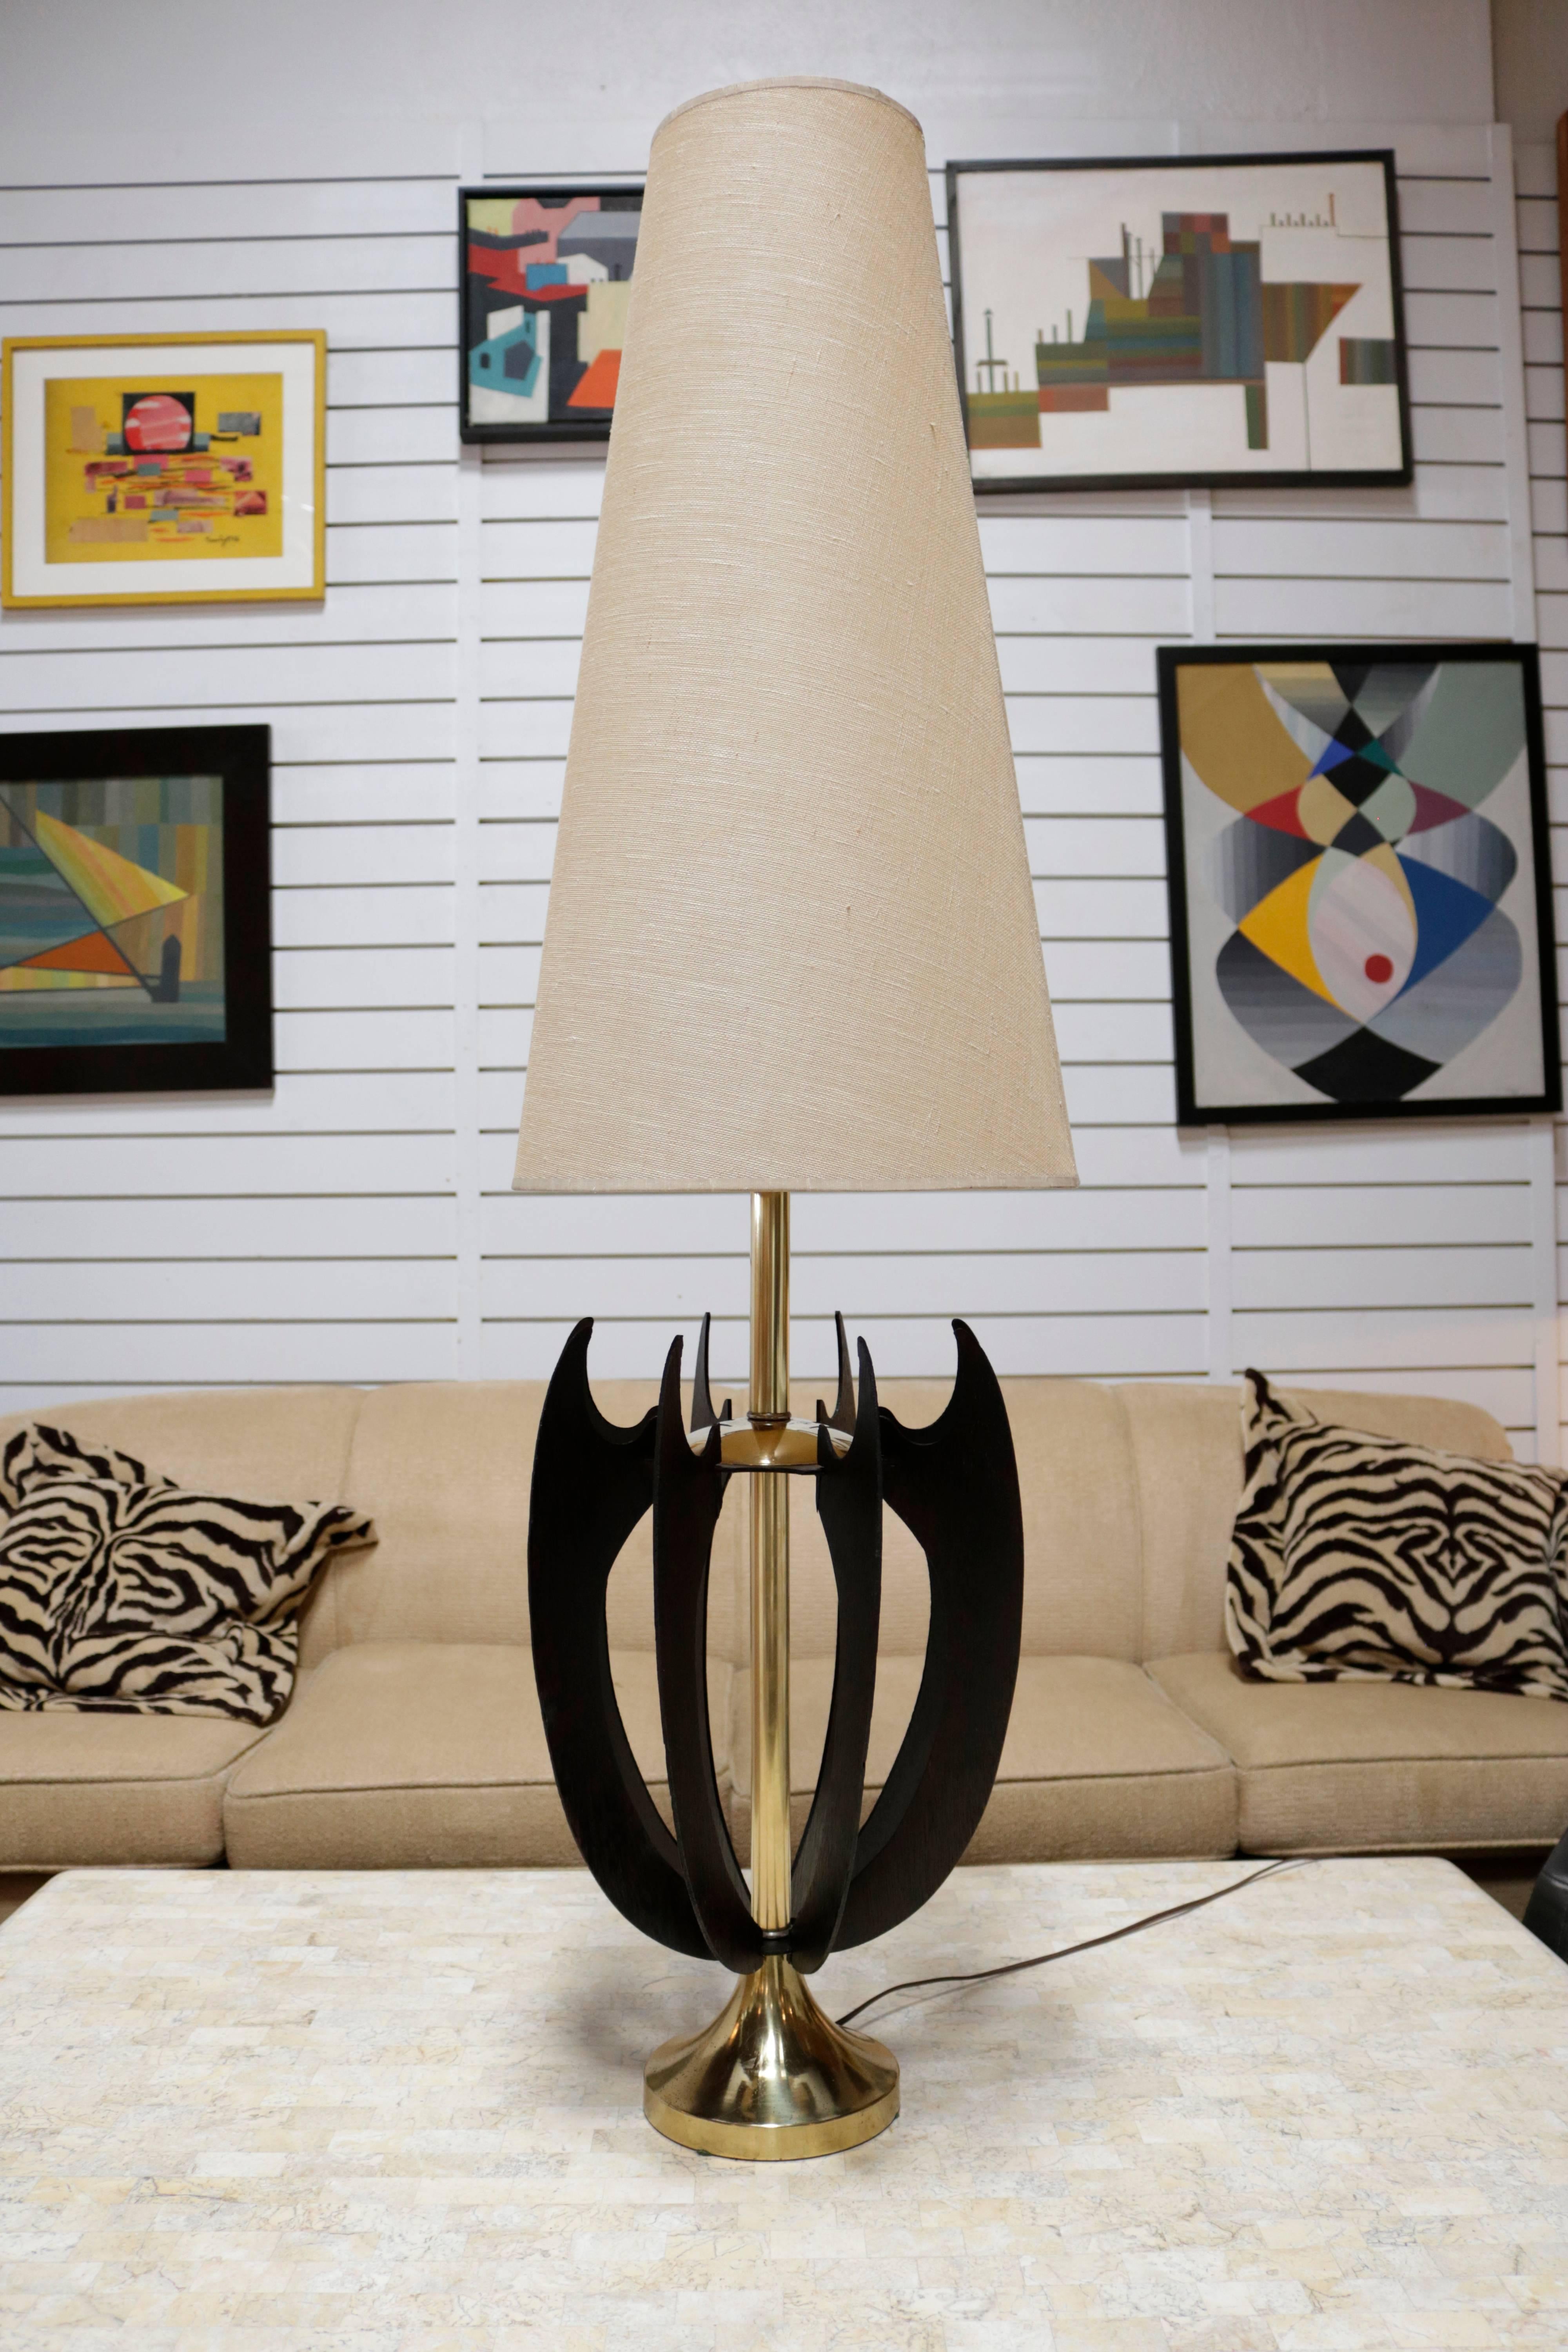 These Danish midcentury lamps have six sculptural strips of wood that join at the bottom base and curve up in a wider design. A brass base and shaft hold up the wood parts and shade. Newly stained black. Measures 50" tall as pictured or